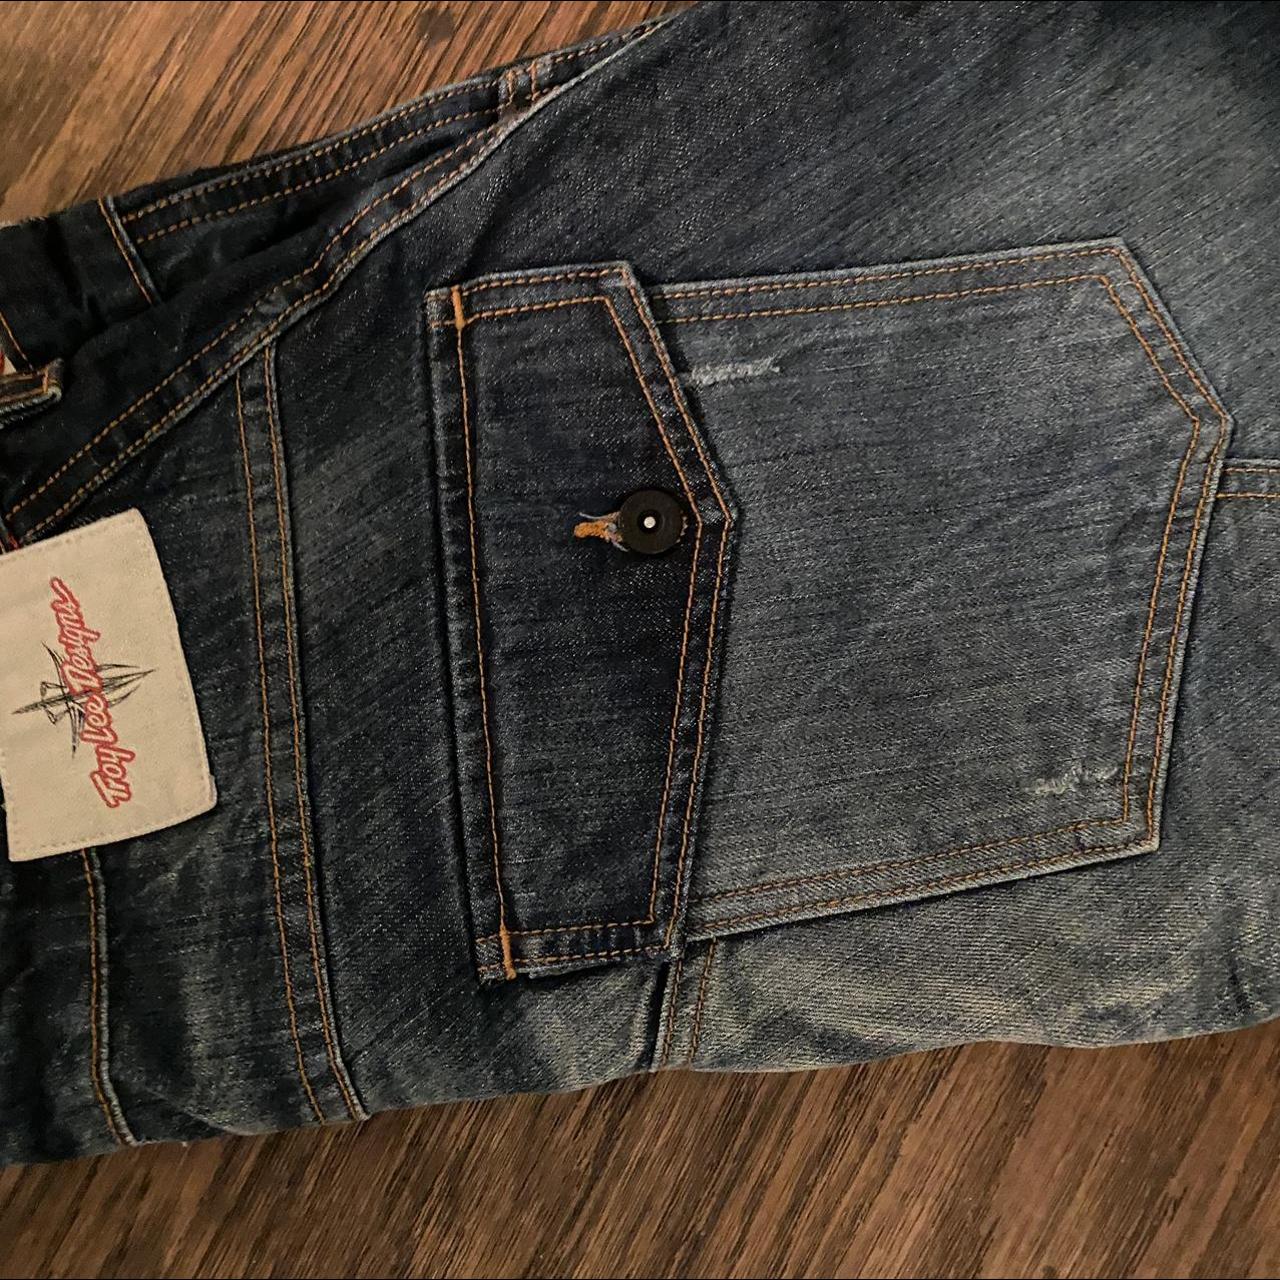 troy lee jeans faded button fly size 34 - Depop